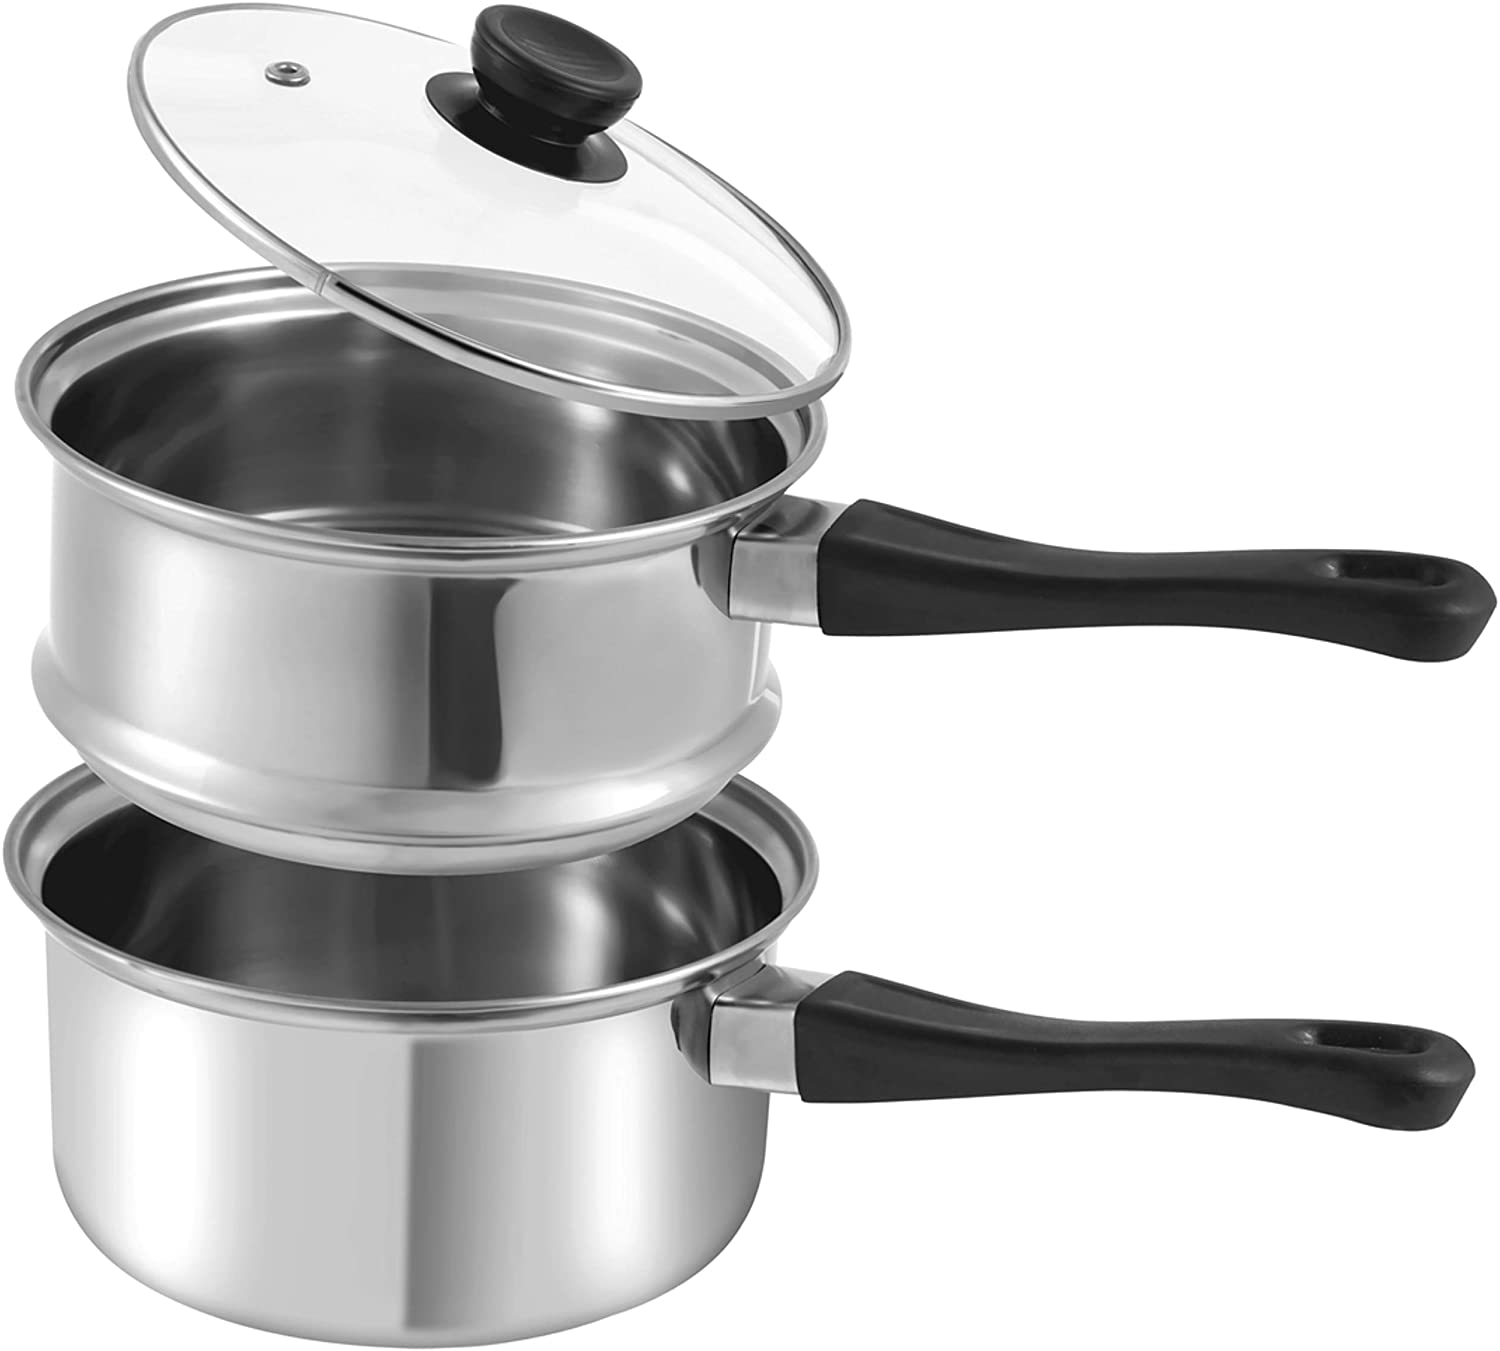 Stainless Steel 6 Cup Double Boiler – 1.5 Quart Saucepan 2-in-1 Combo with  Vented Glass Lid- Kitchen Cookware with Measurements by Classic Cuisine